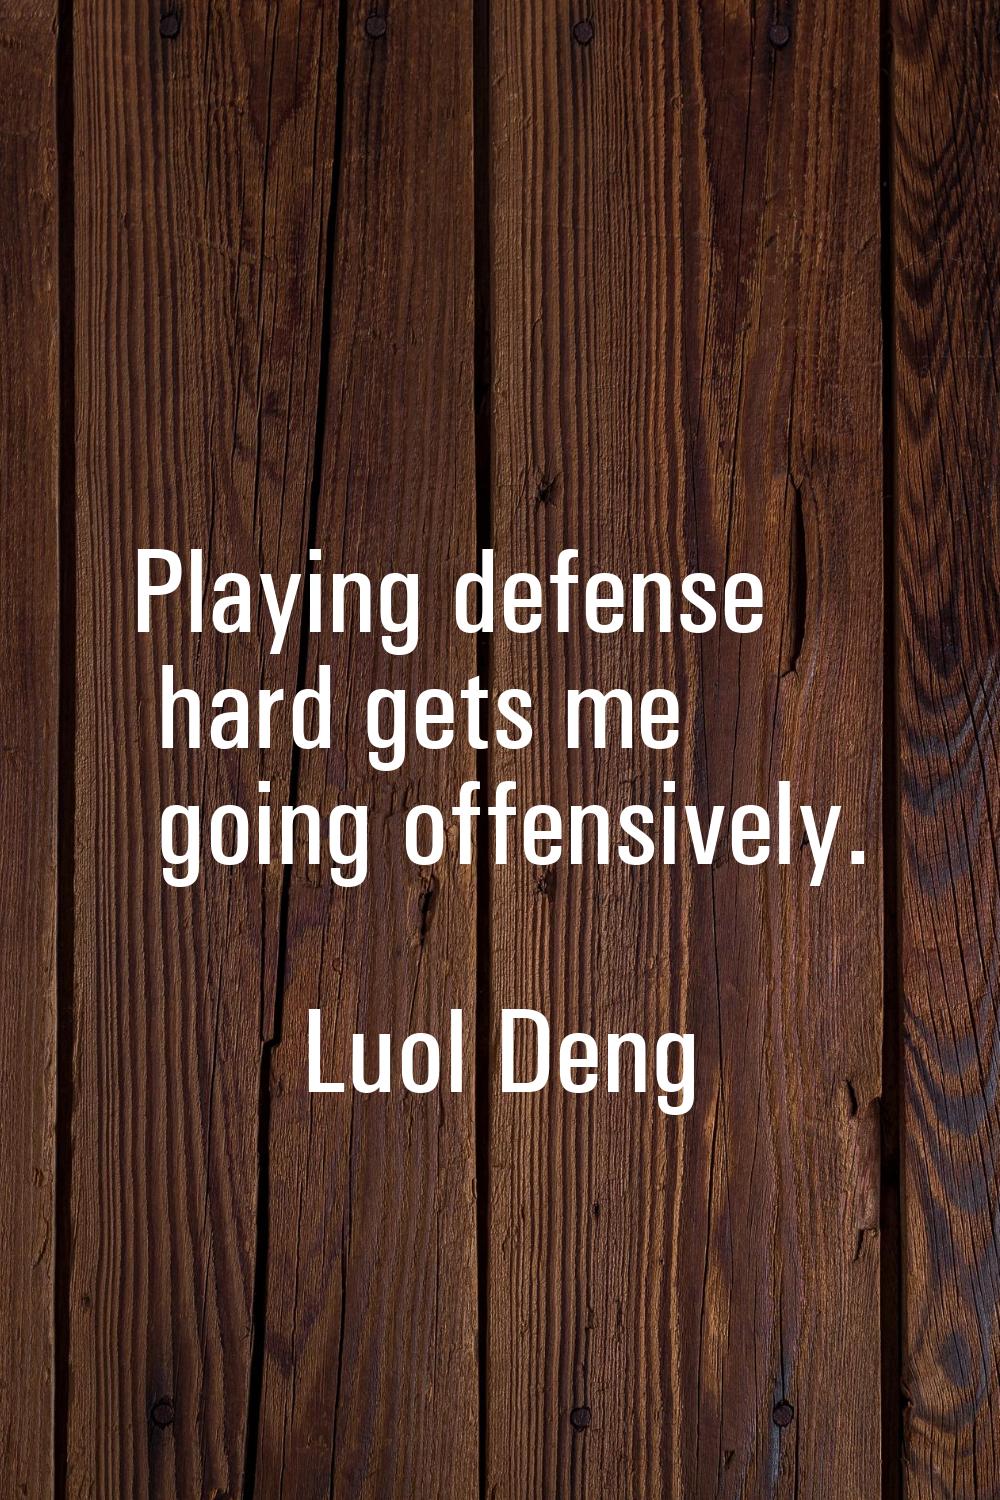 Playing defense hard gets me going offensively.